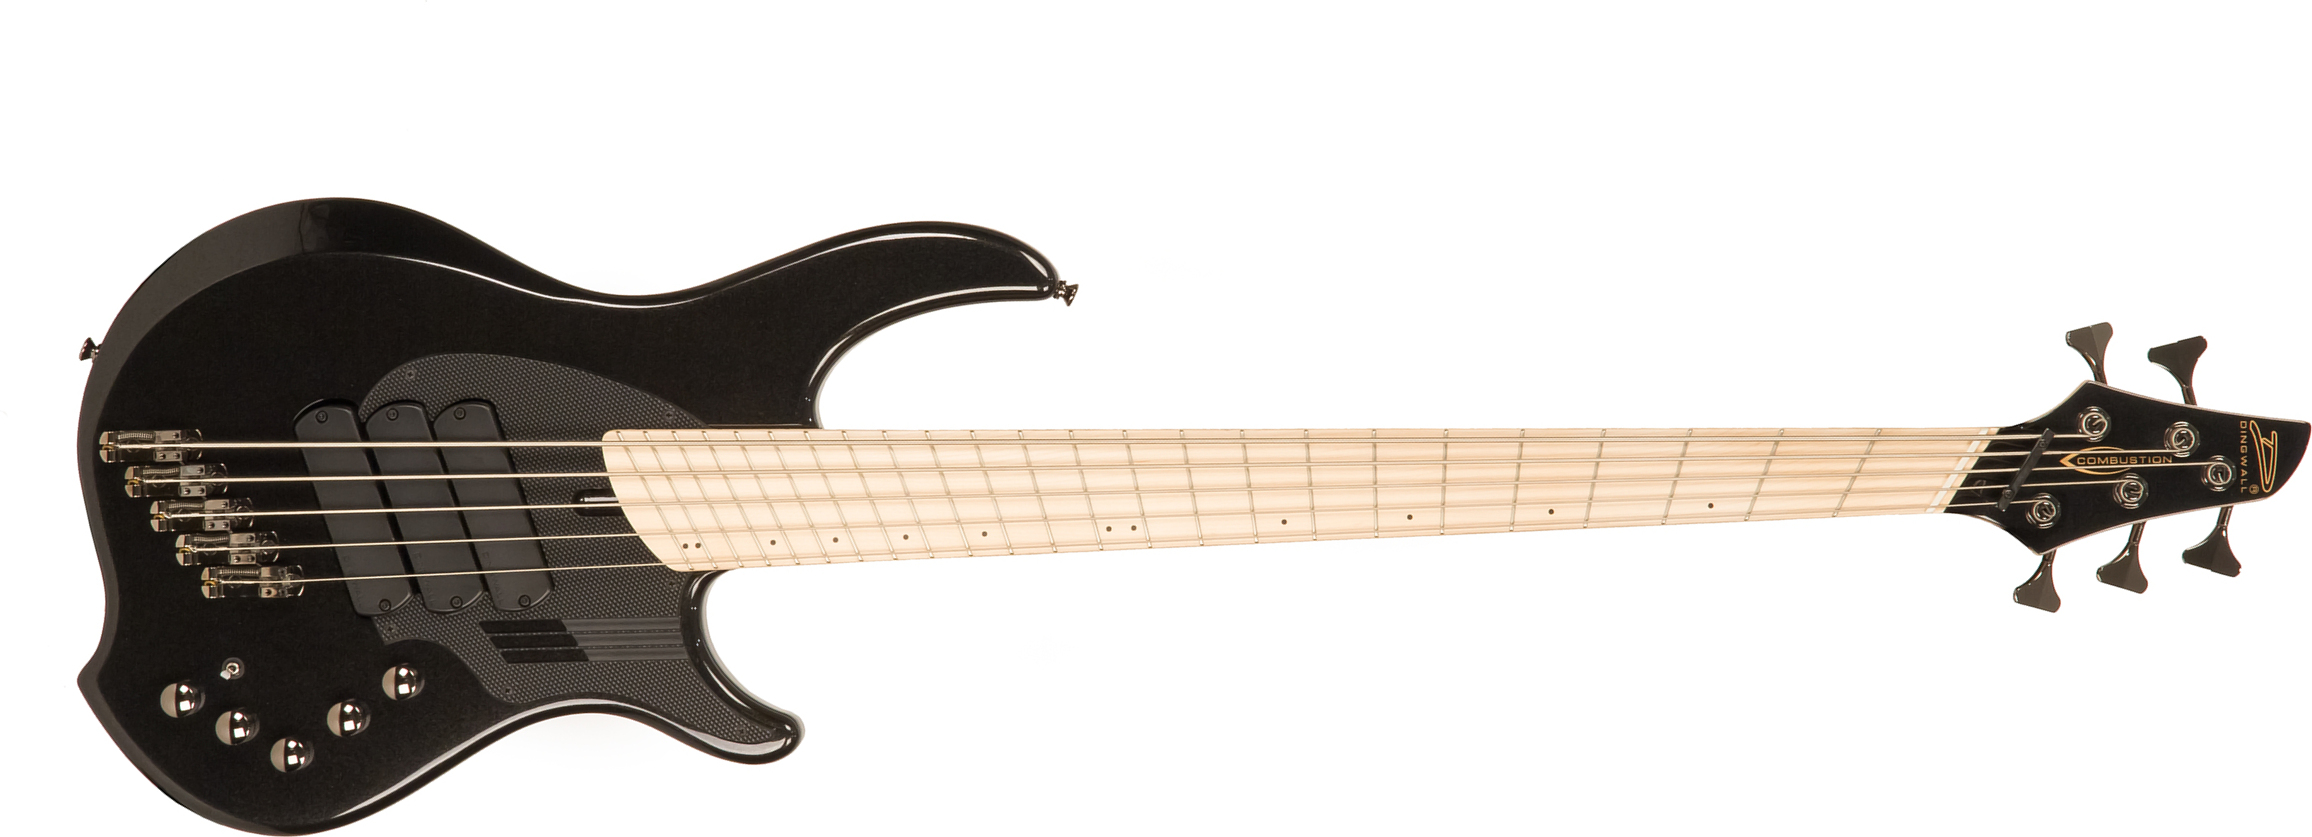 Dingwall Adam Nolly Getgood Ng3 5c Signature 3pu Active Mn - Metallic Black - Basse Électrique Solid Body - Main picture